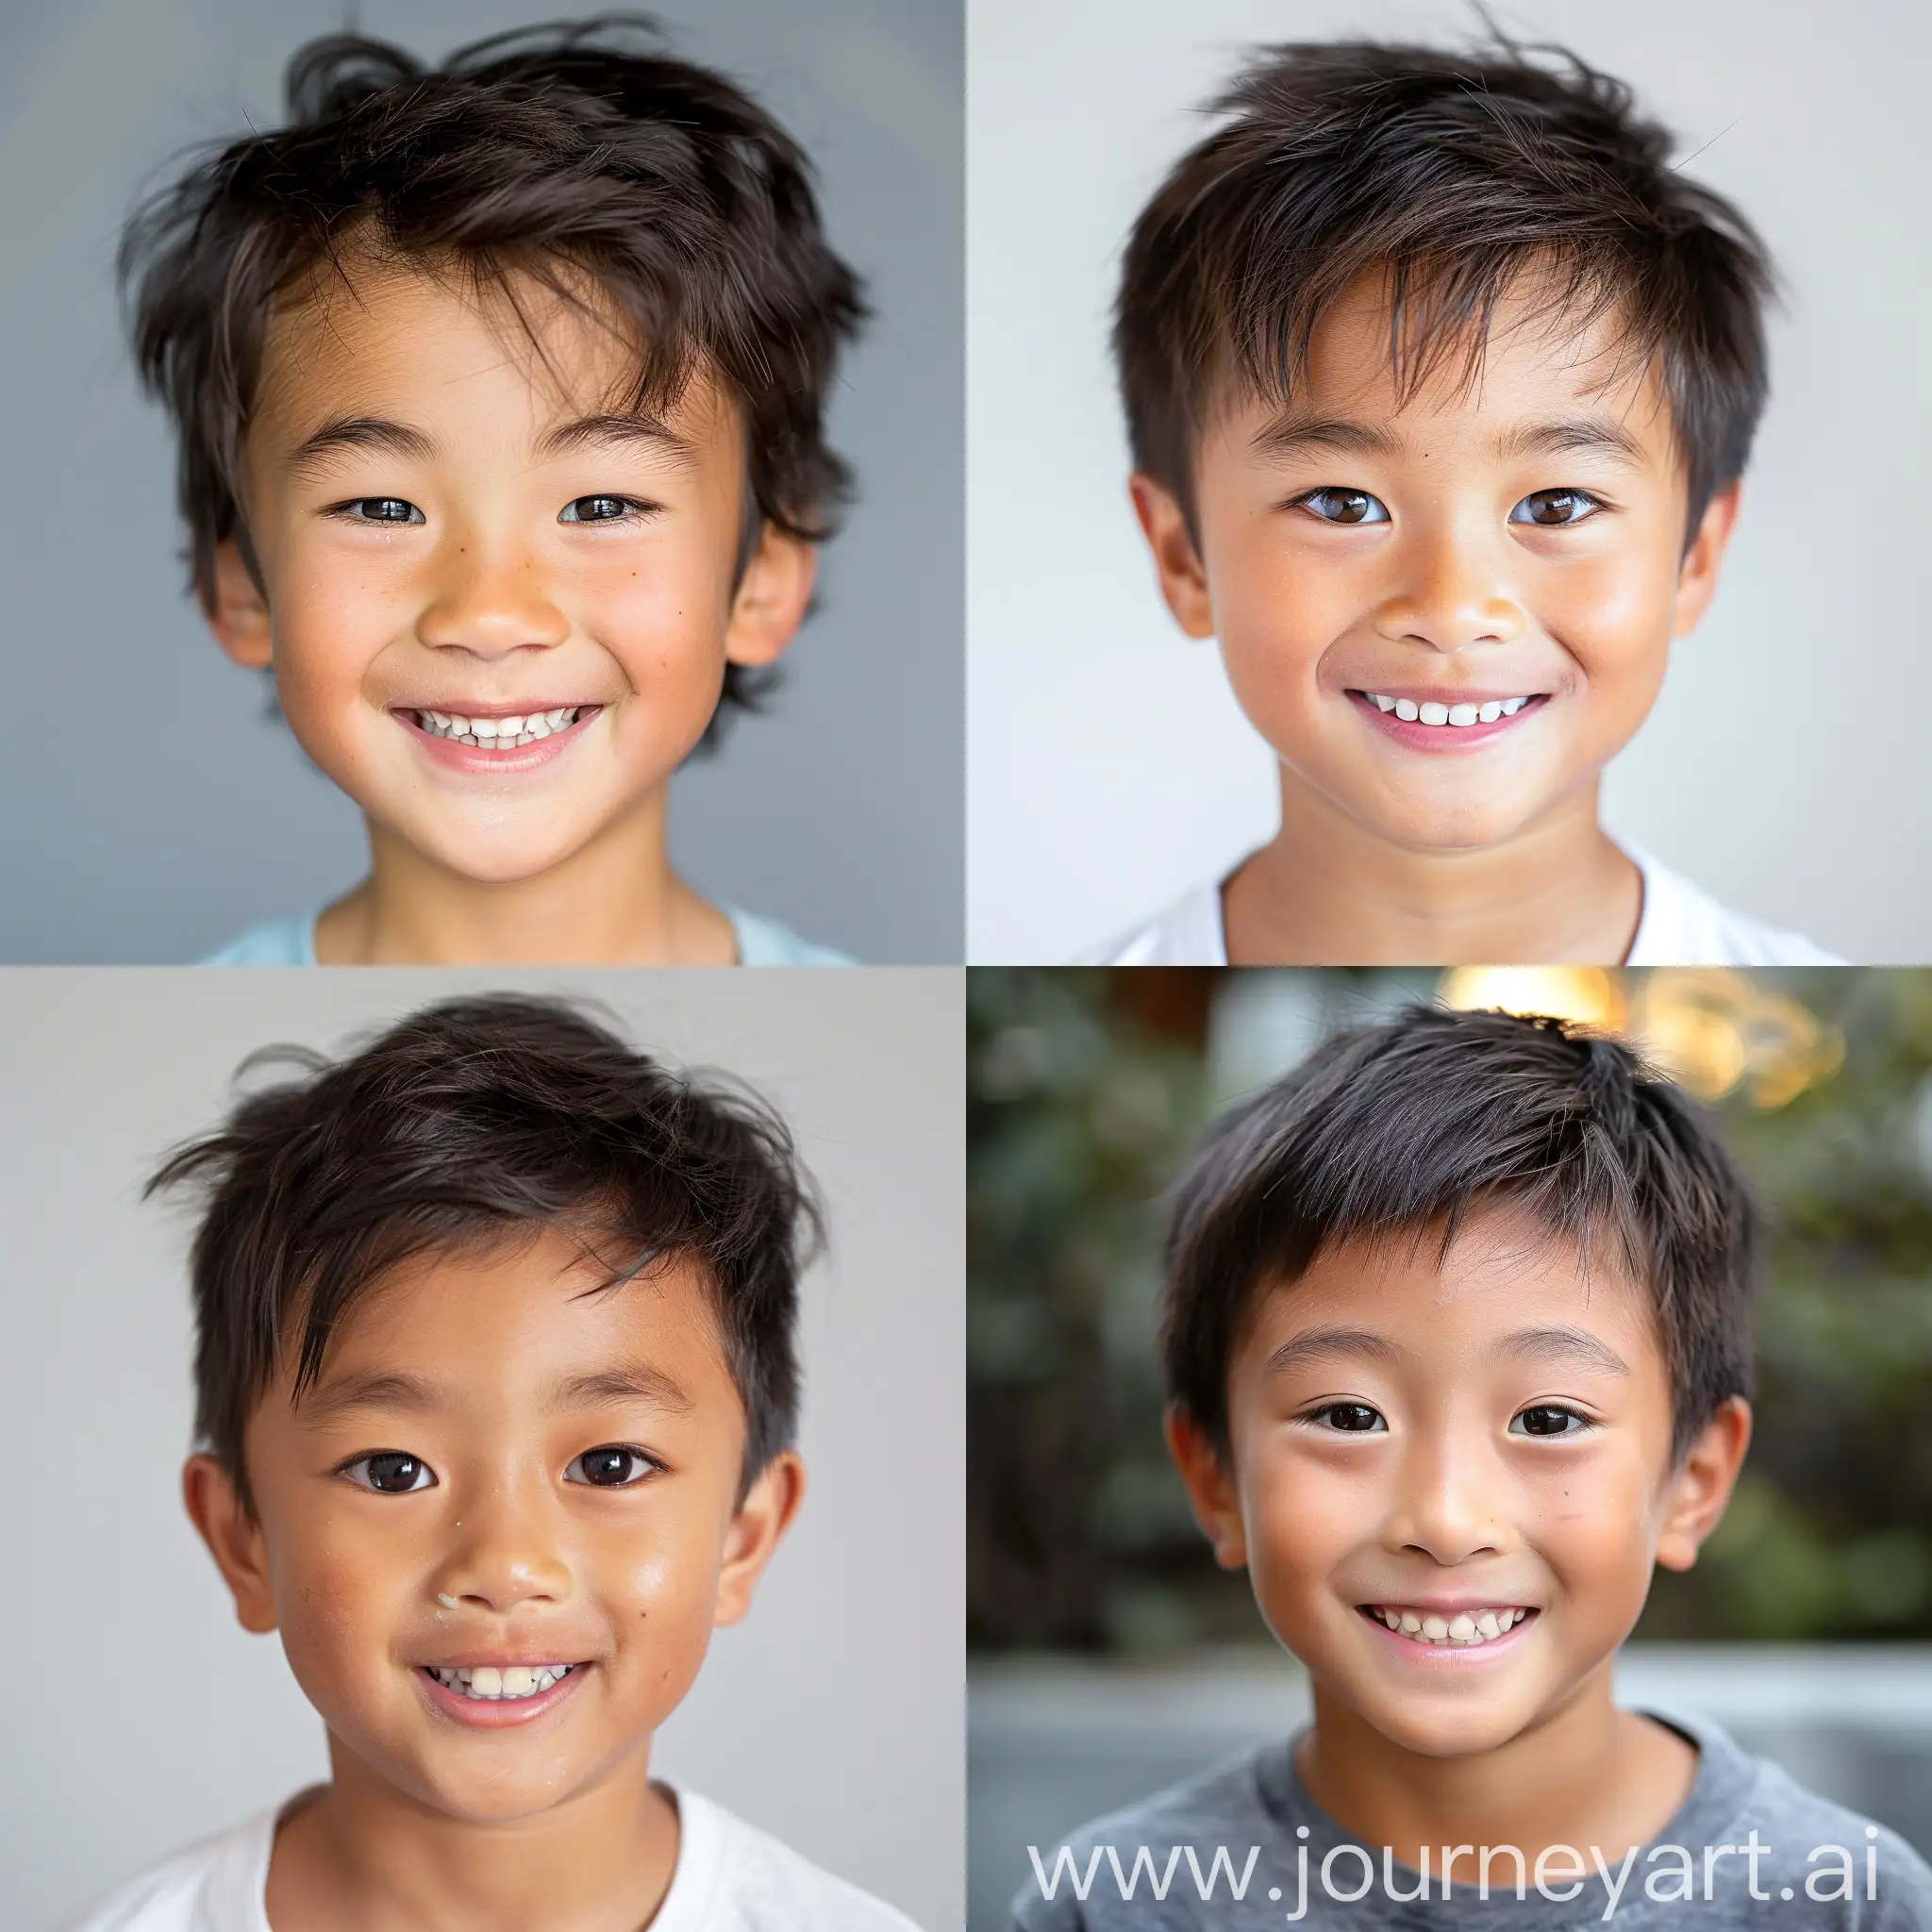 British-Chinese 10-year-old boy
Loves to smile and adorable
Striking features - thick eyebrows, large expressive eyes
Passionate about art
Enjoys Thai boxing
Fond of mathematics
ADHD, but well-controlled with medication
Very self-disciplined
Energetic and vibrant personality
Engaged in a variety of activities - arts, sports, and academics



